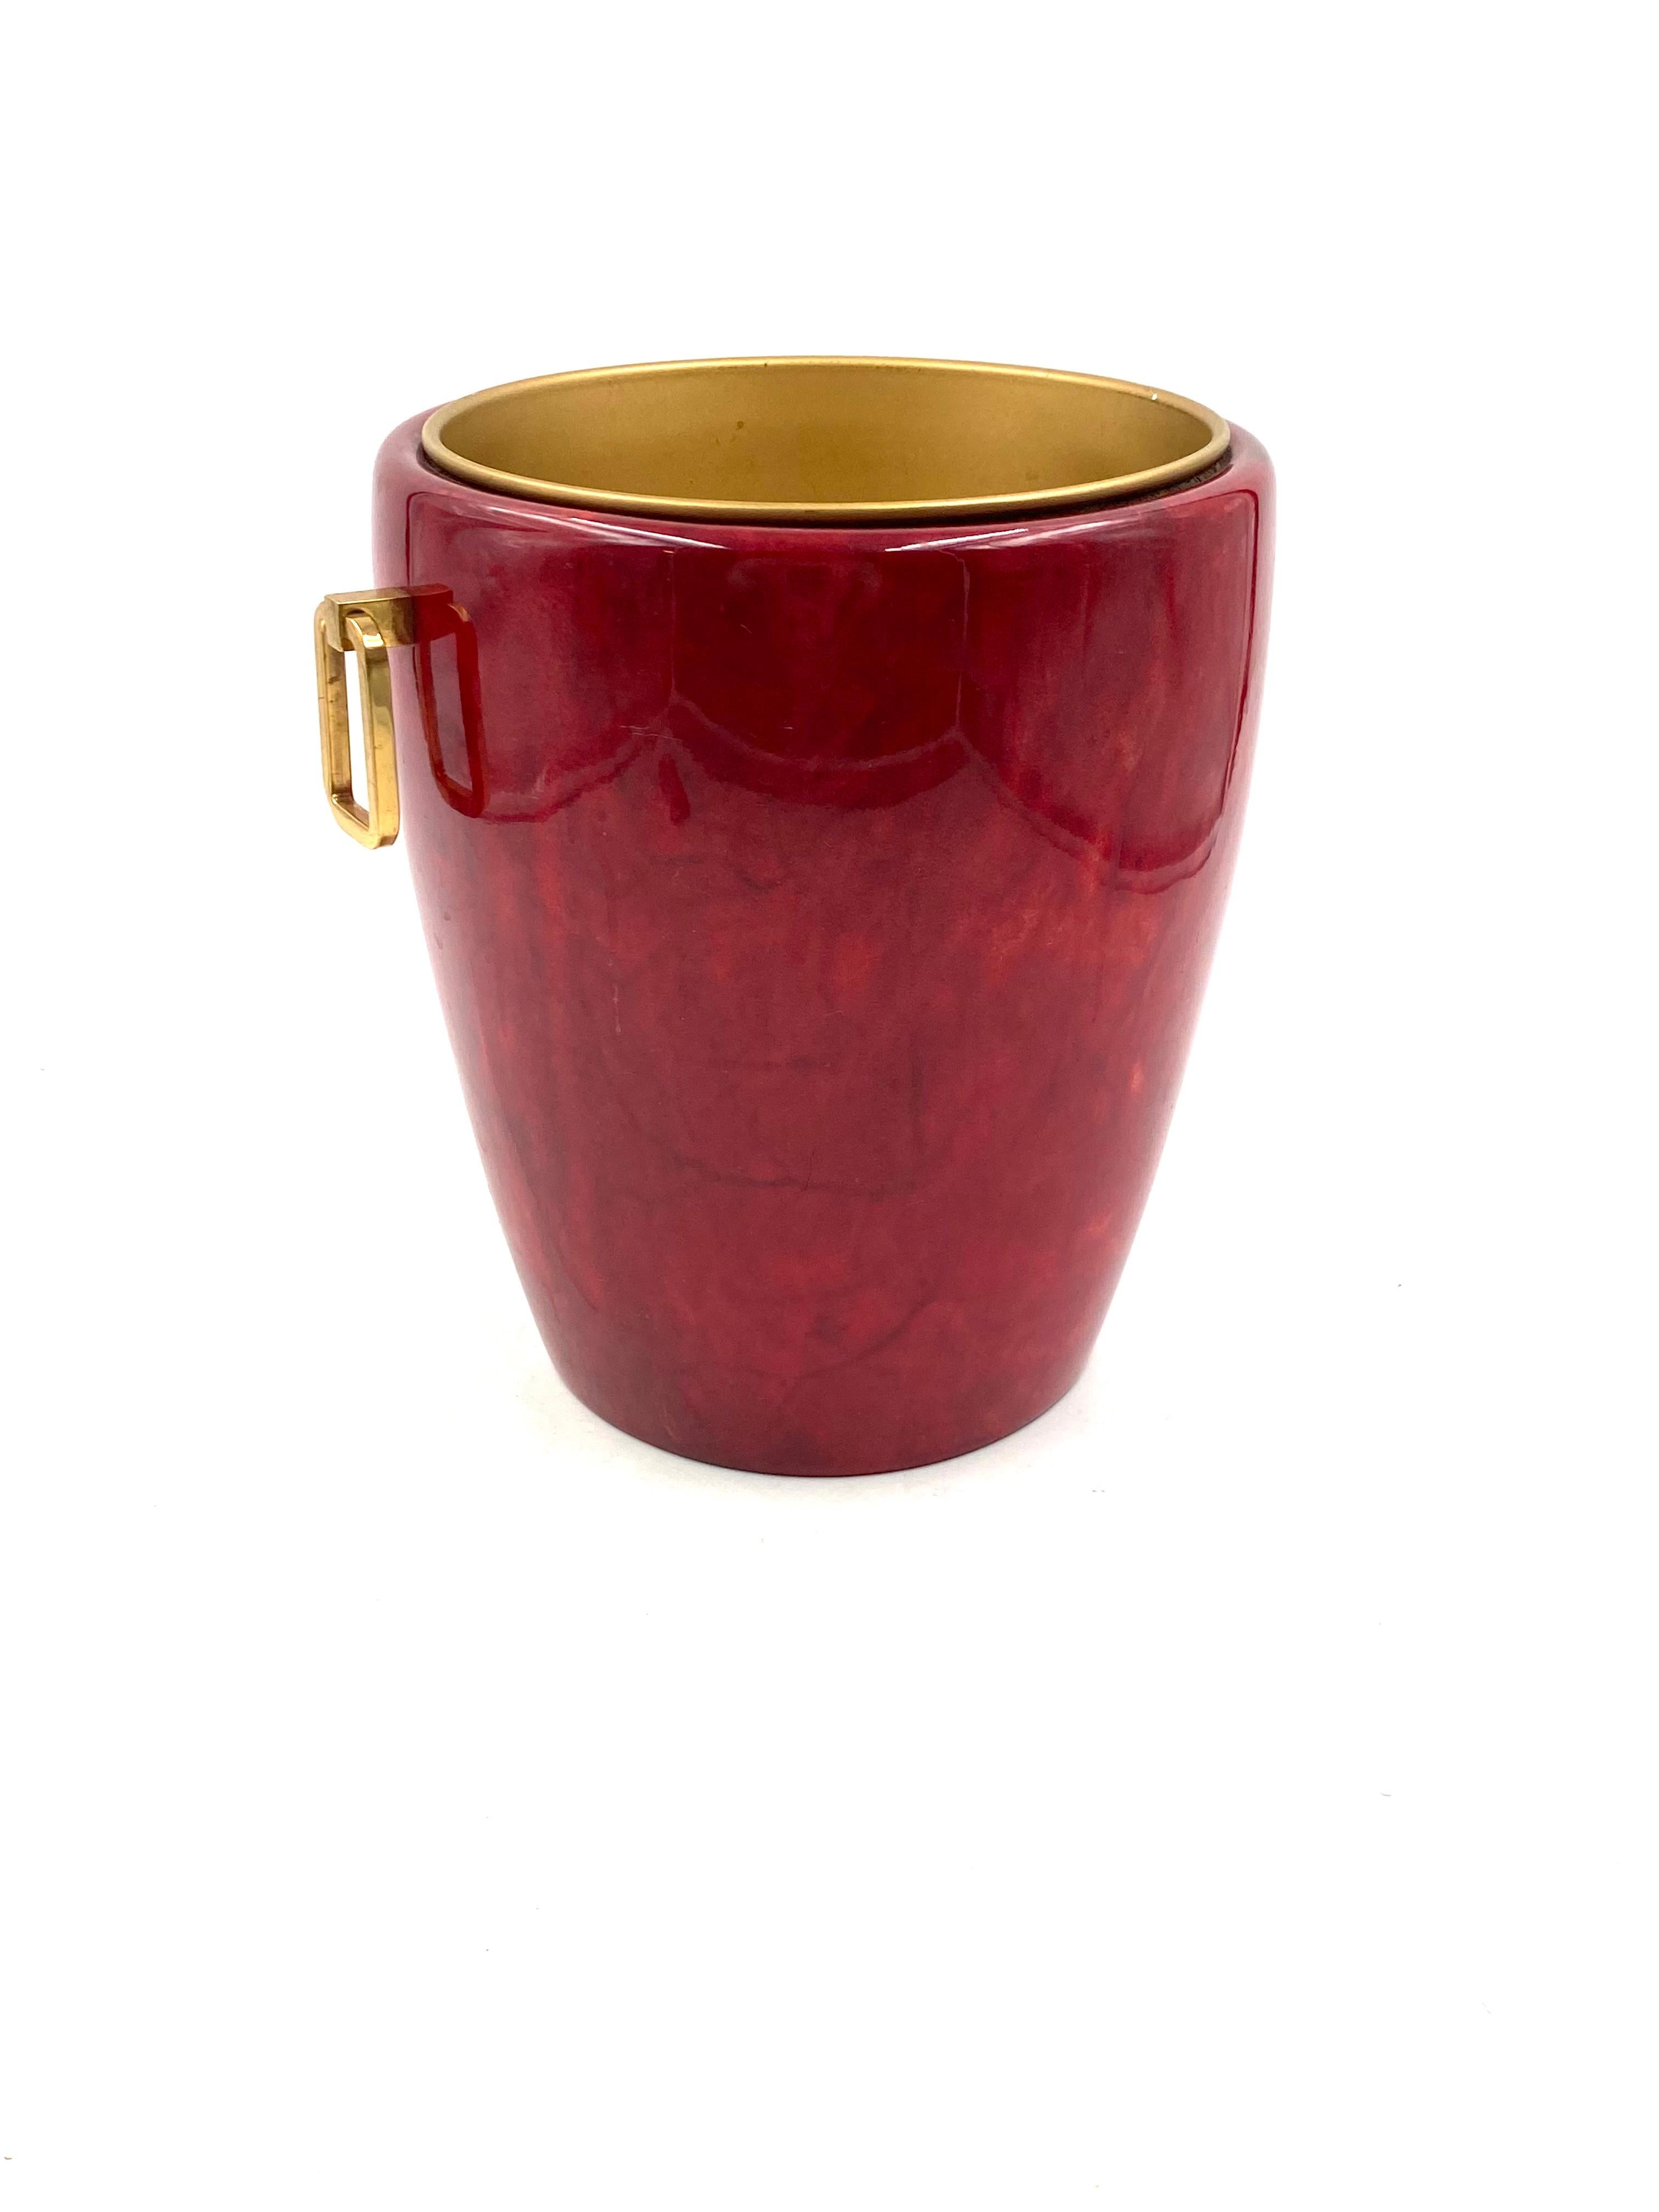 Aldo Tura, Brass and red Parchment cooler / Ice bucket, Italy, 1960s 8